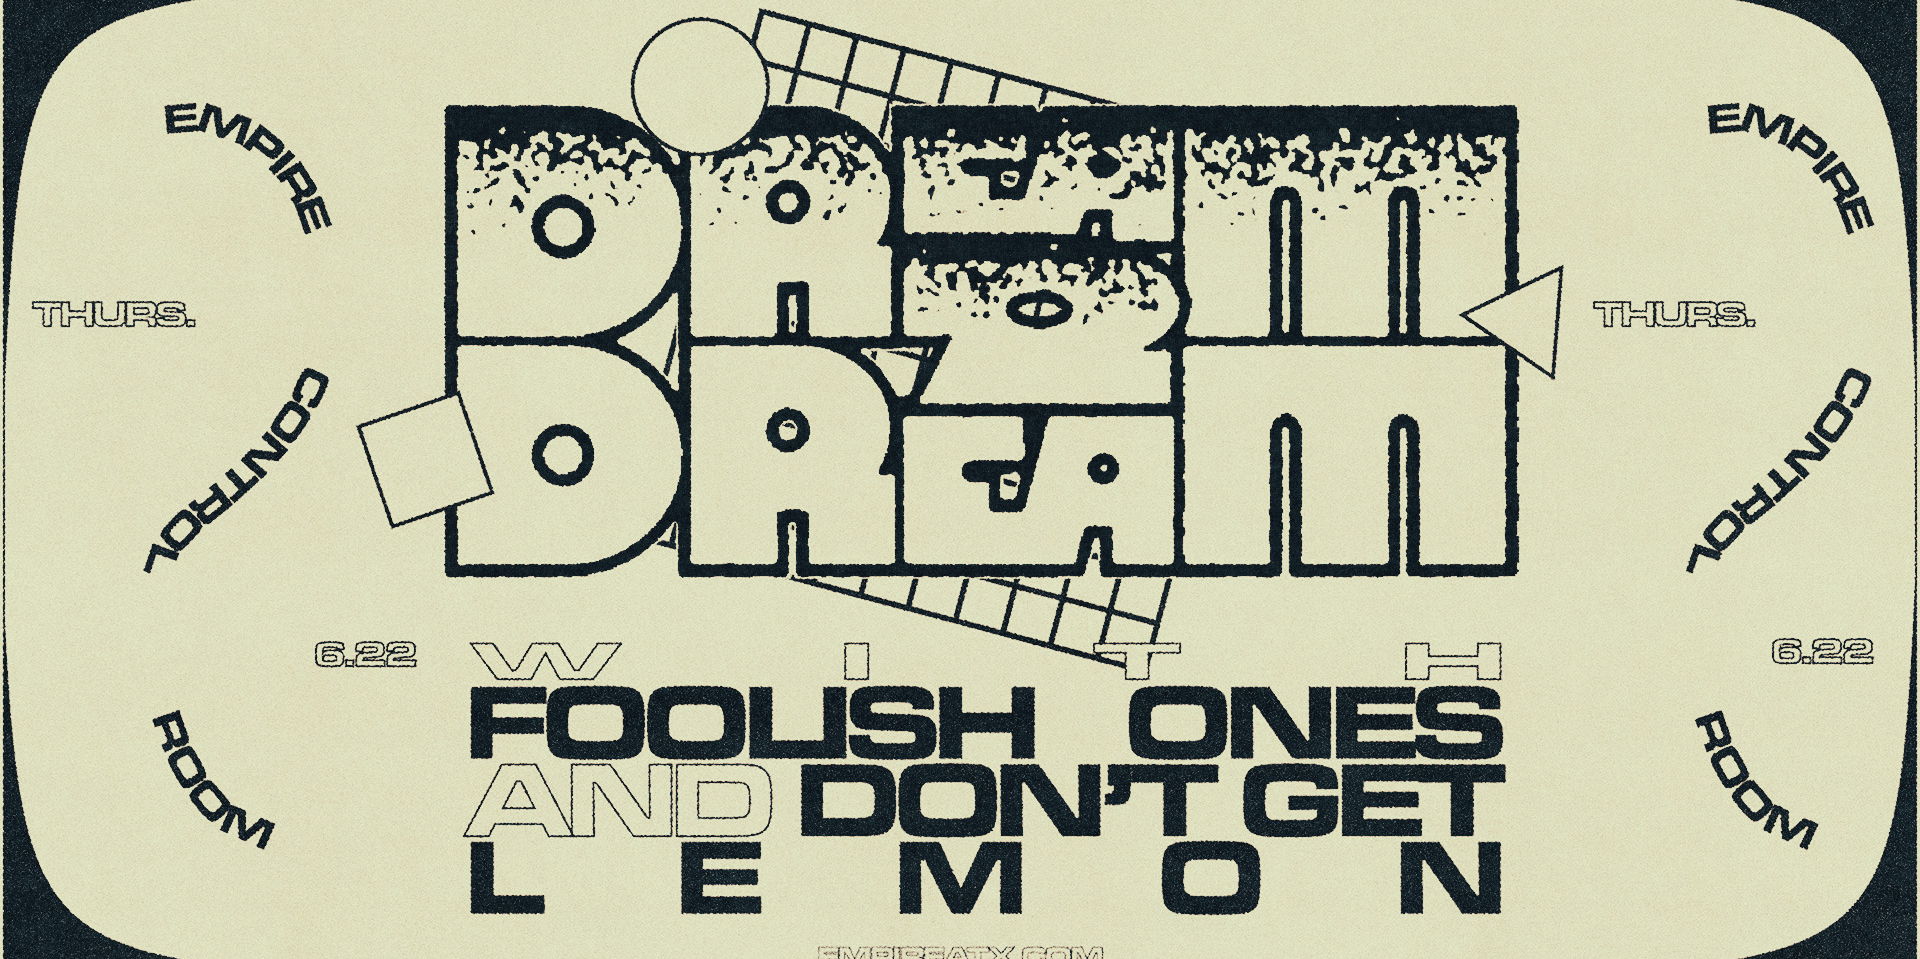 Empire Presents: Dream 2 Dream w/ Foolish Ones and Don't Get Lemon promotional image